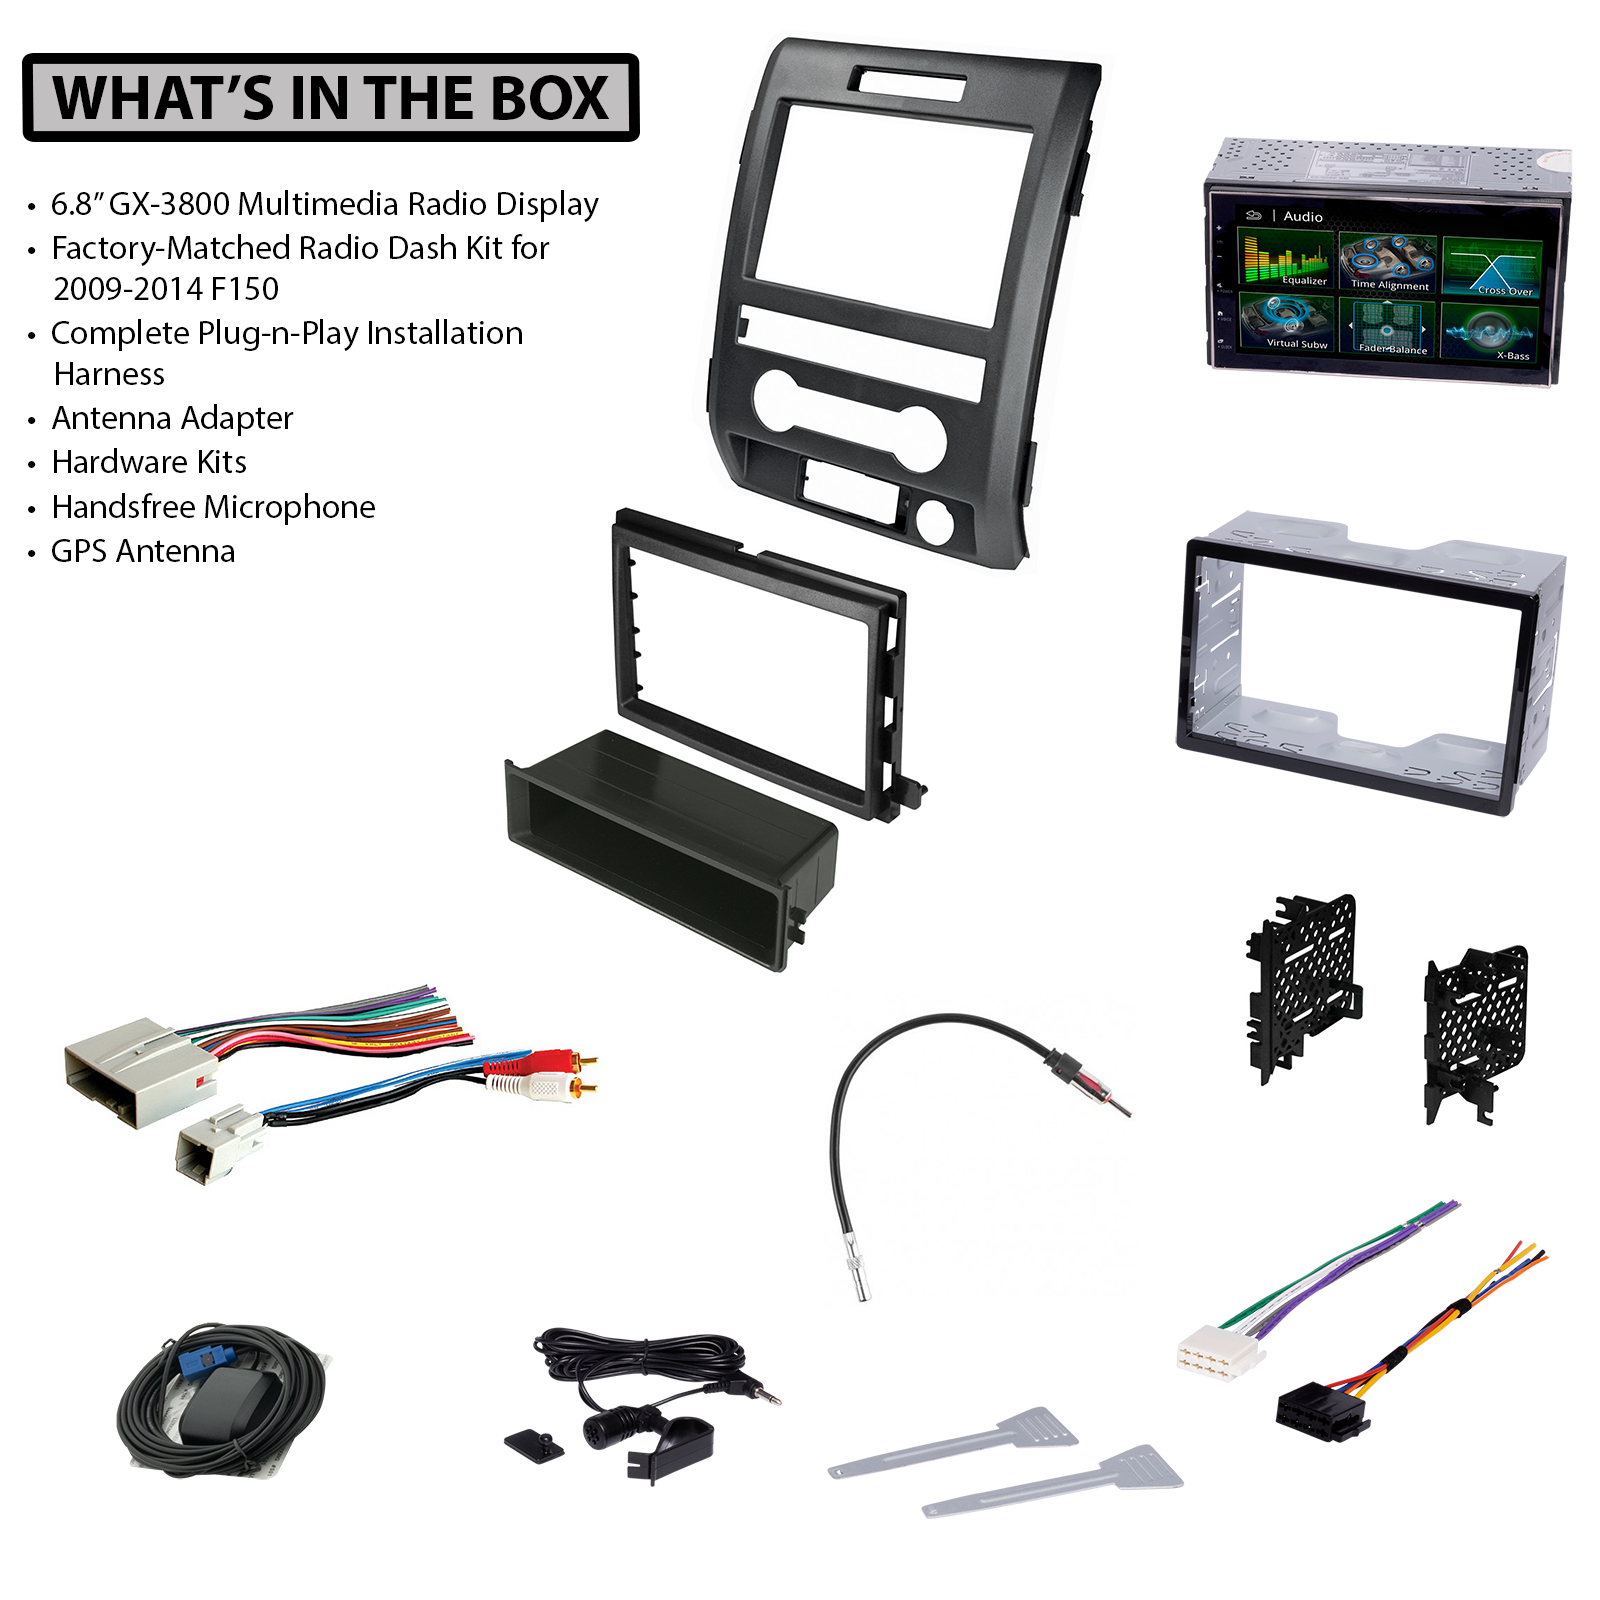 Ford F-150 (2009-2014) 6.8" Double DIN Radio Kit with Rear License Plate Camera